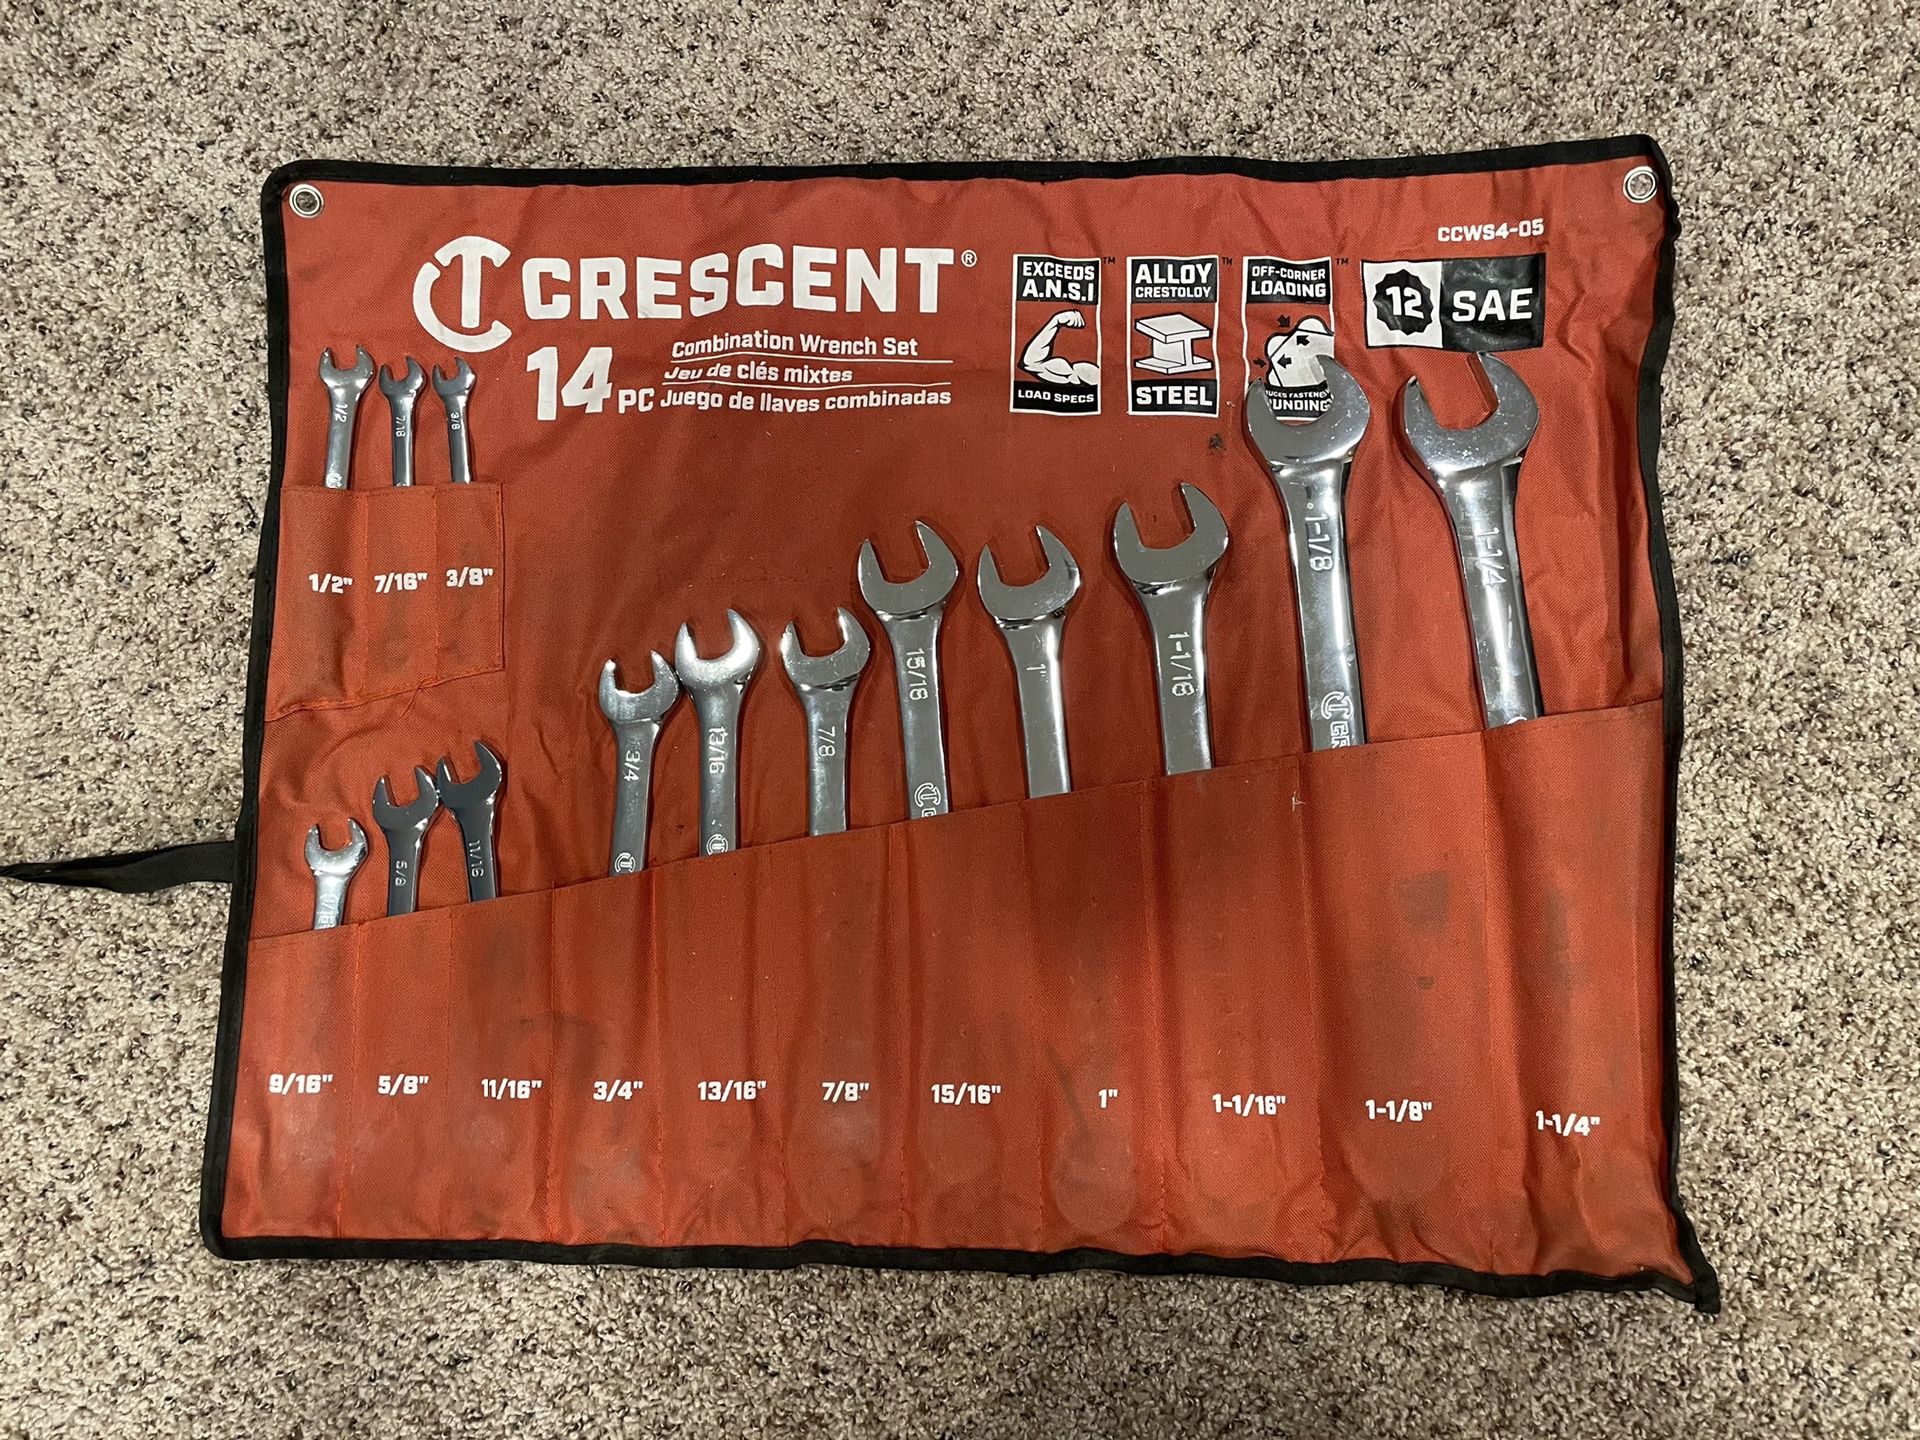 Crescent wrench kit, 3/8”- 1 1/4”, 